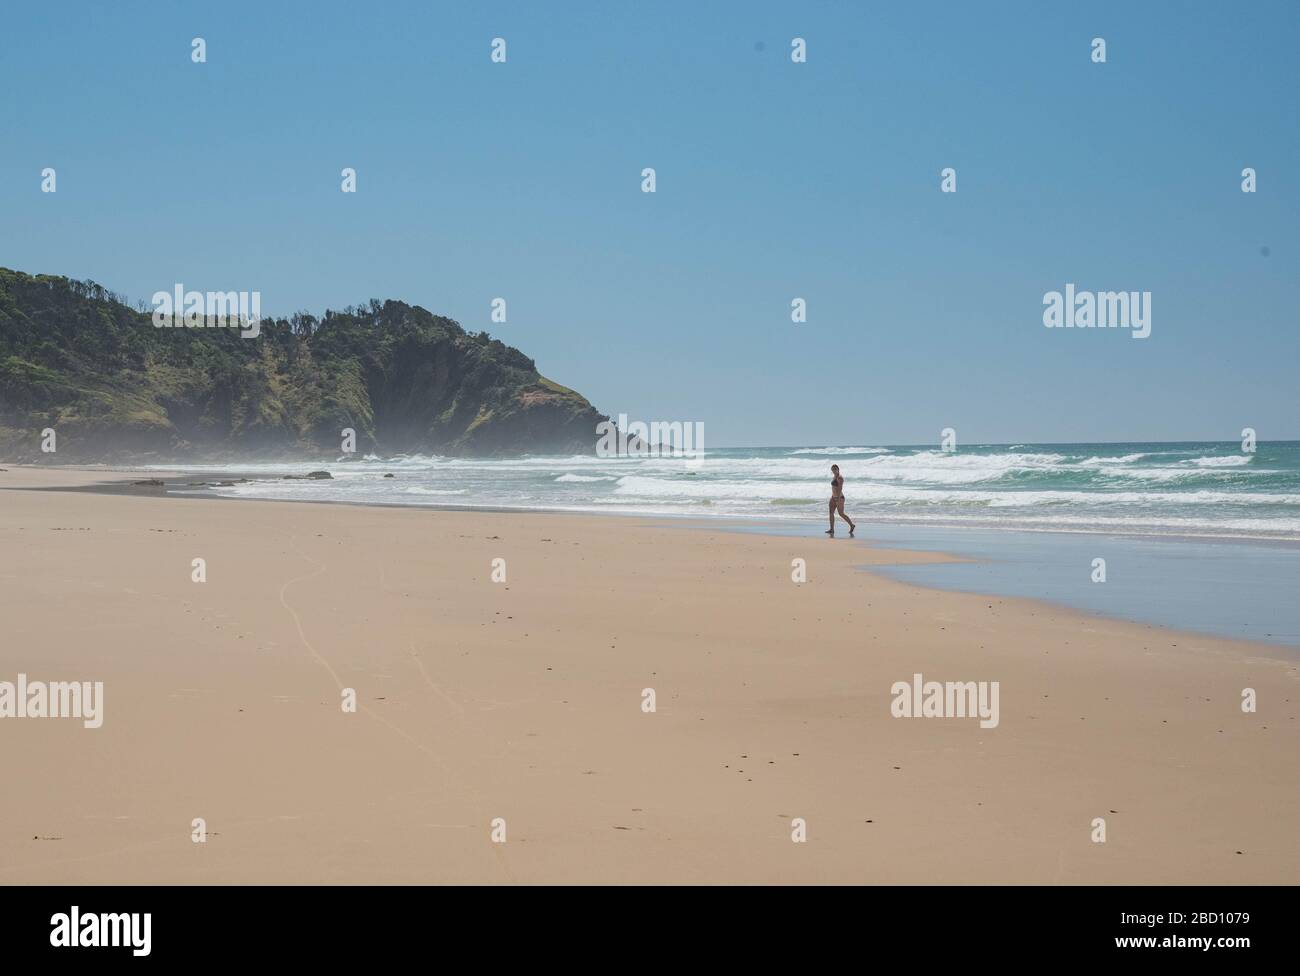 A view of semi deserted Broken Head beach near Byron Bay.New South Wales and Queensland cities decide to shutdown beaches. Australian authorities are taking actions to reduce crowded places including beaches to stop the spread of Covid-19. Stock Photo